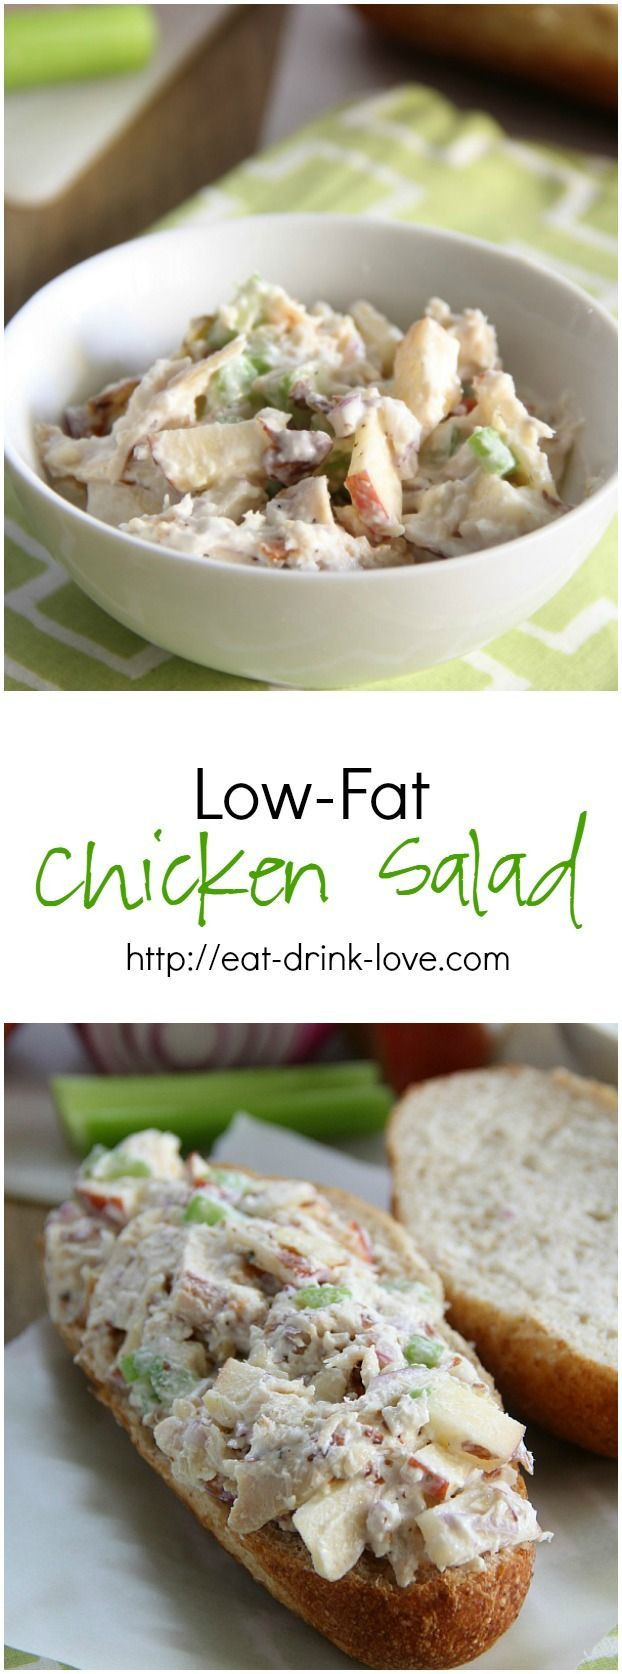 Low Fat Chicken Salad
 1000 images about COOKING HEALTHY FOODS on Pinterest